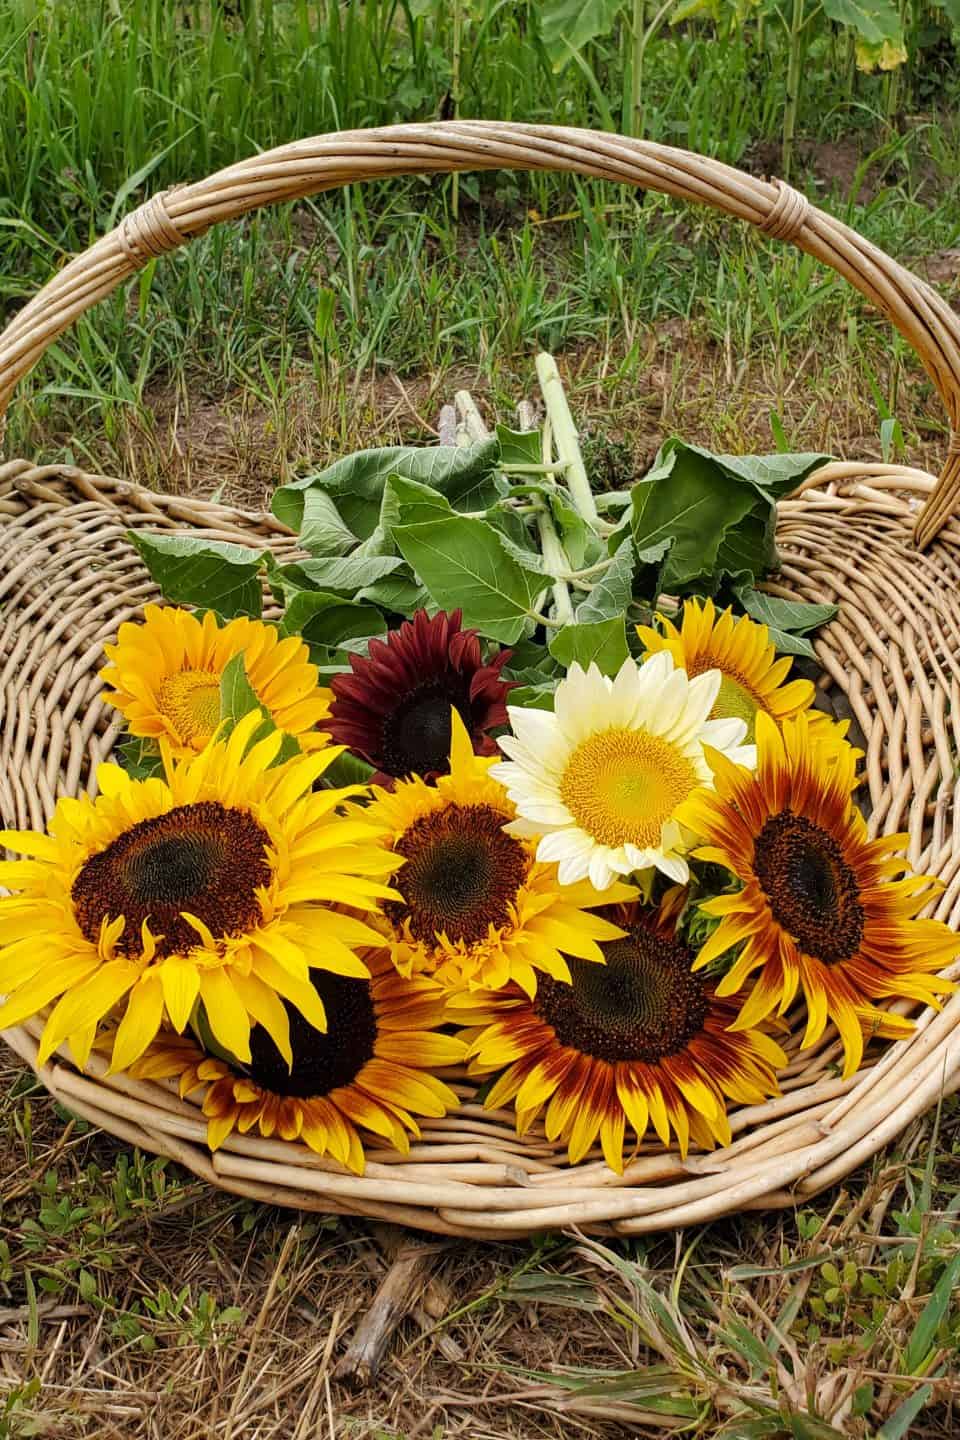 Sunflowers in a basket at Burnside Farms